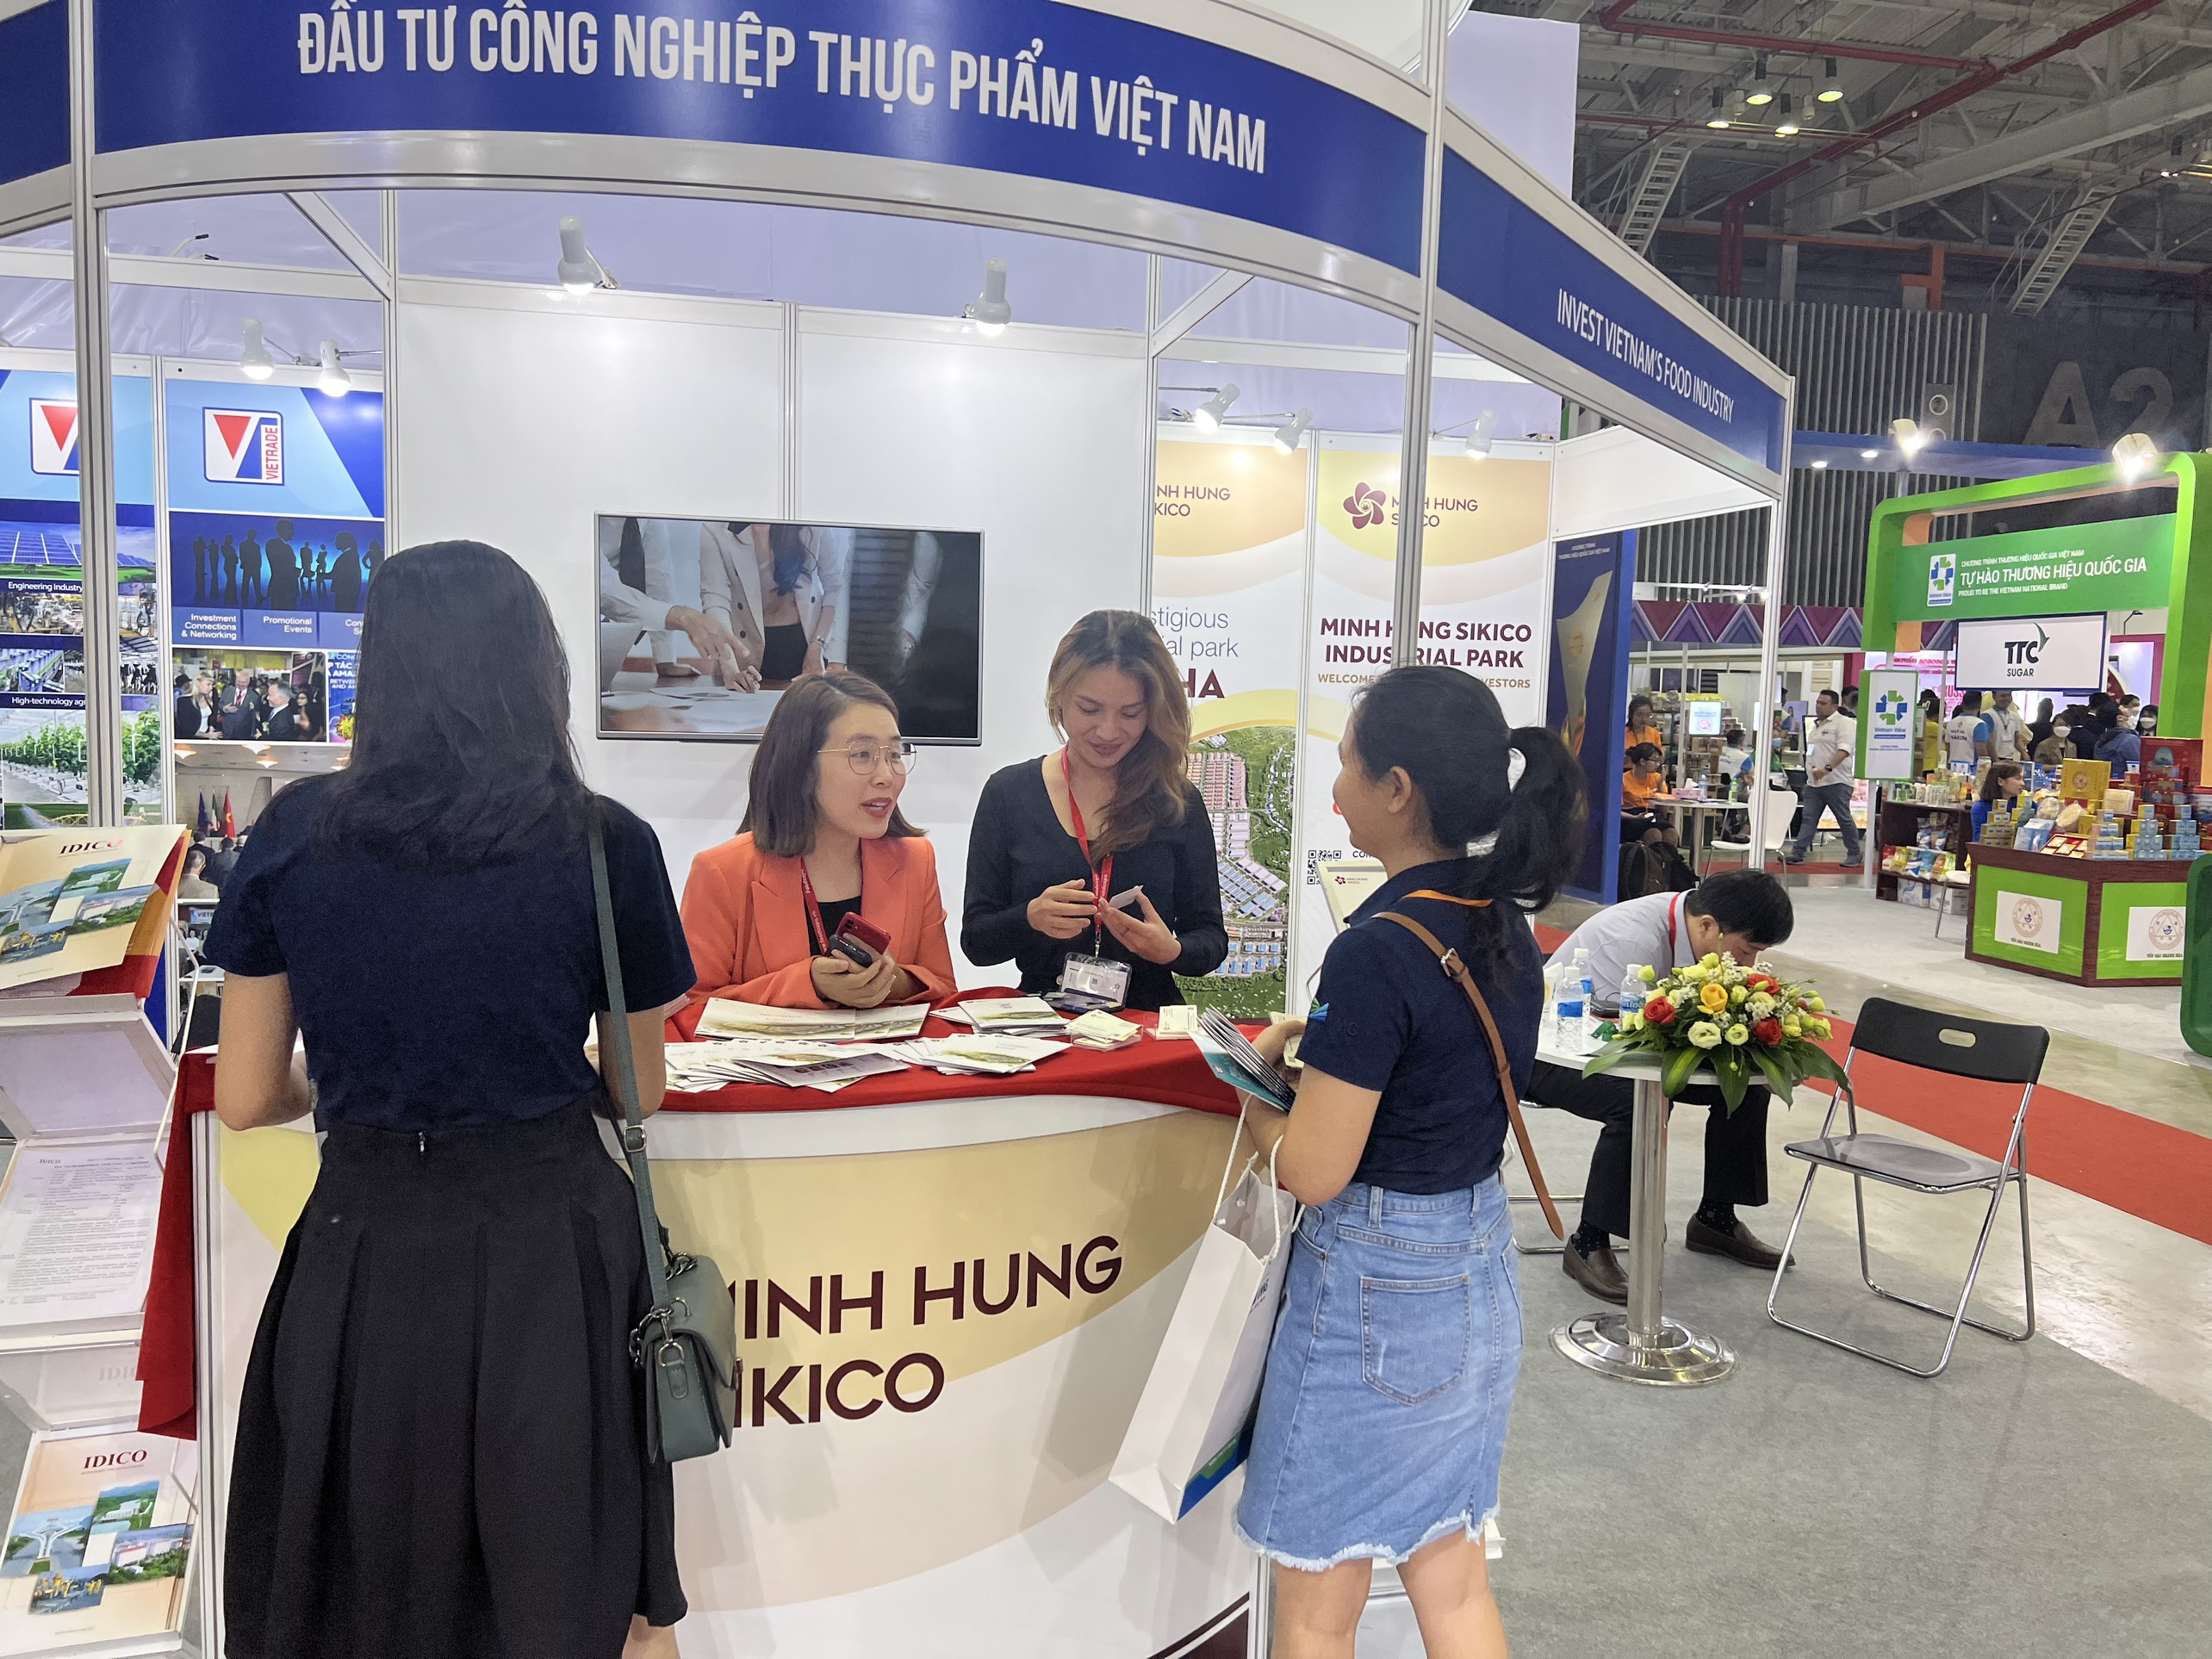 phuoc dong industrial park   port attended the business connection event at the 22nd leather   footwear international exhibition and vietnam foodexpo 2022